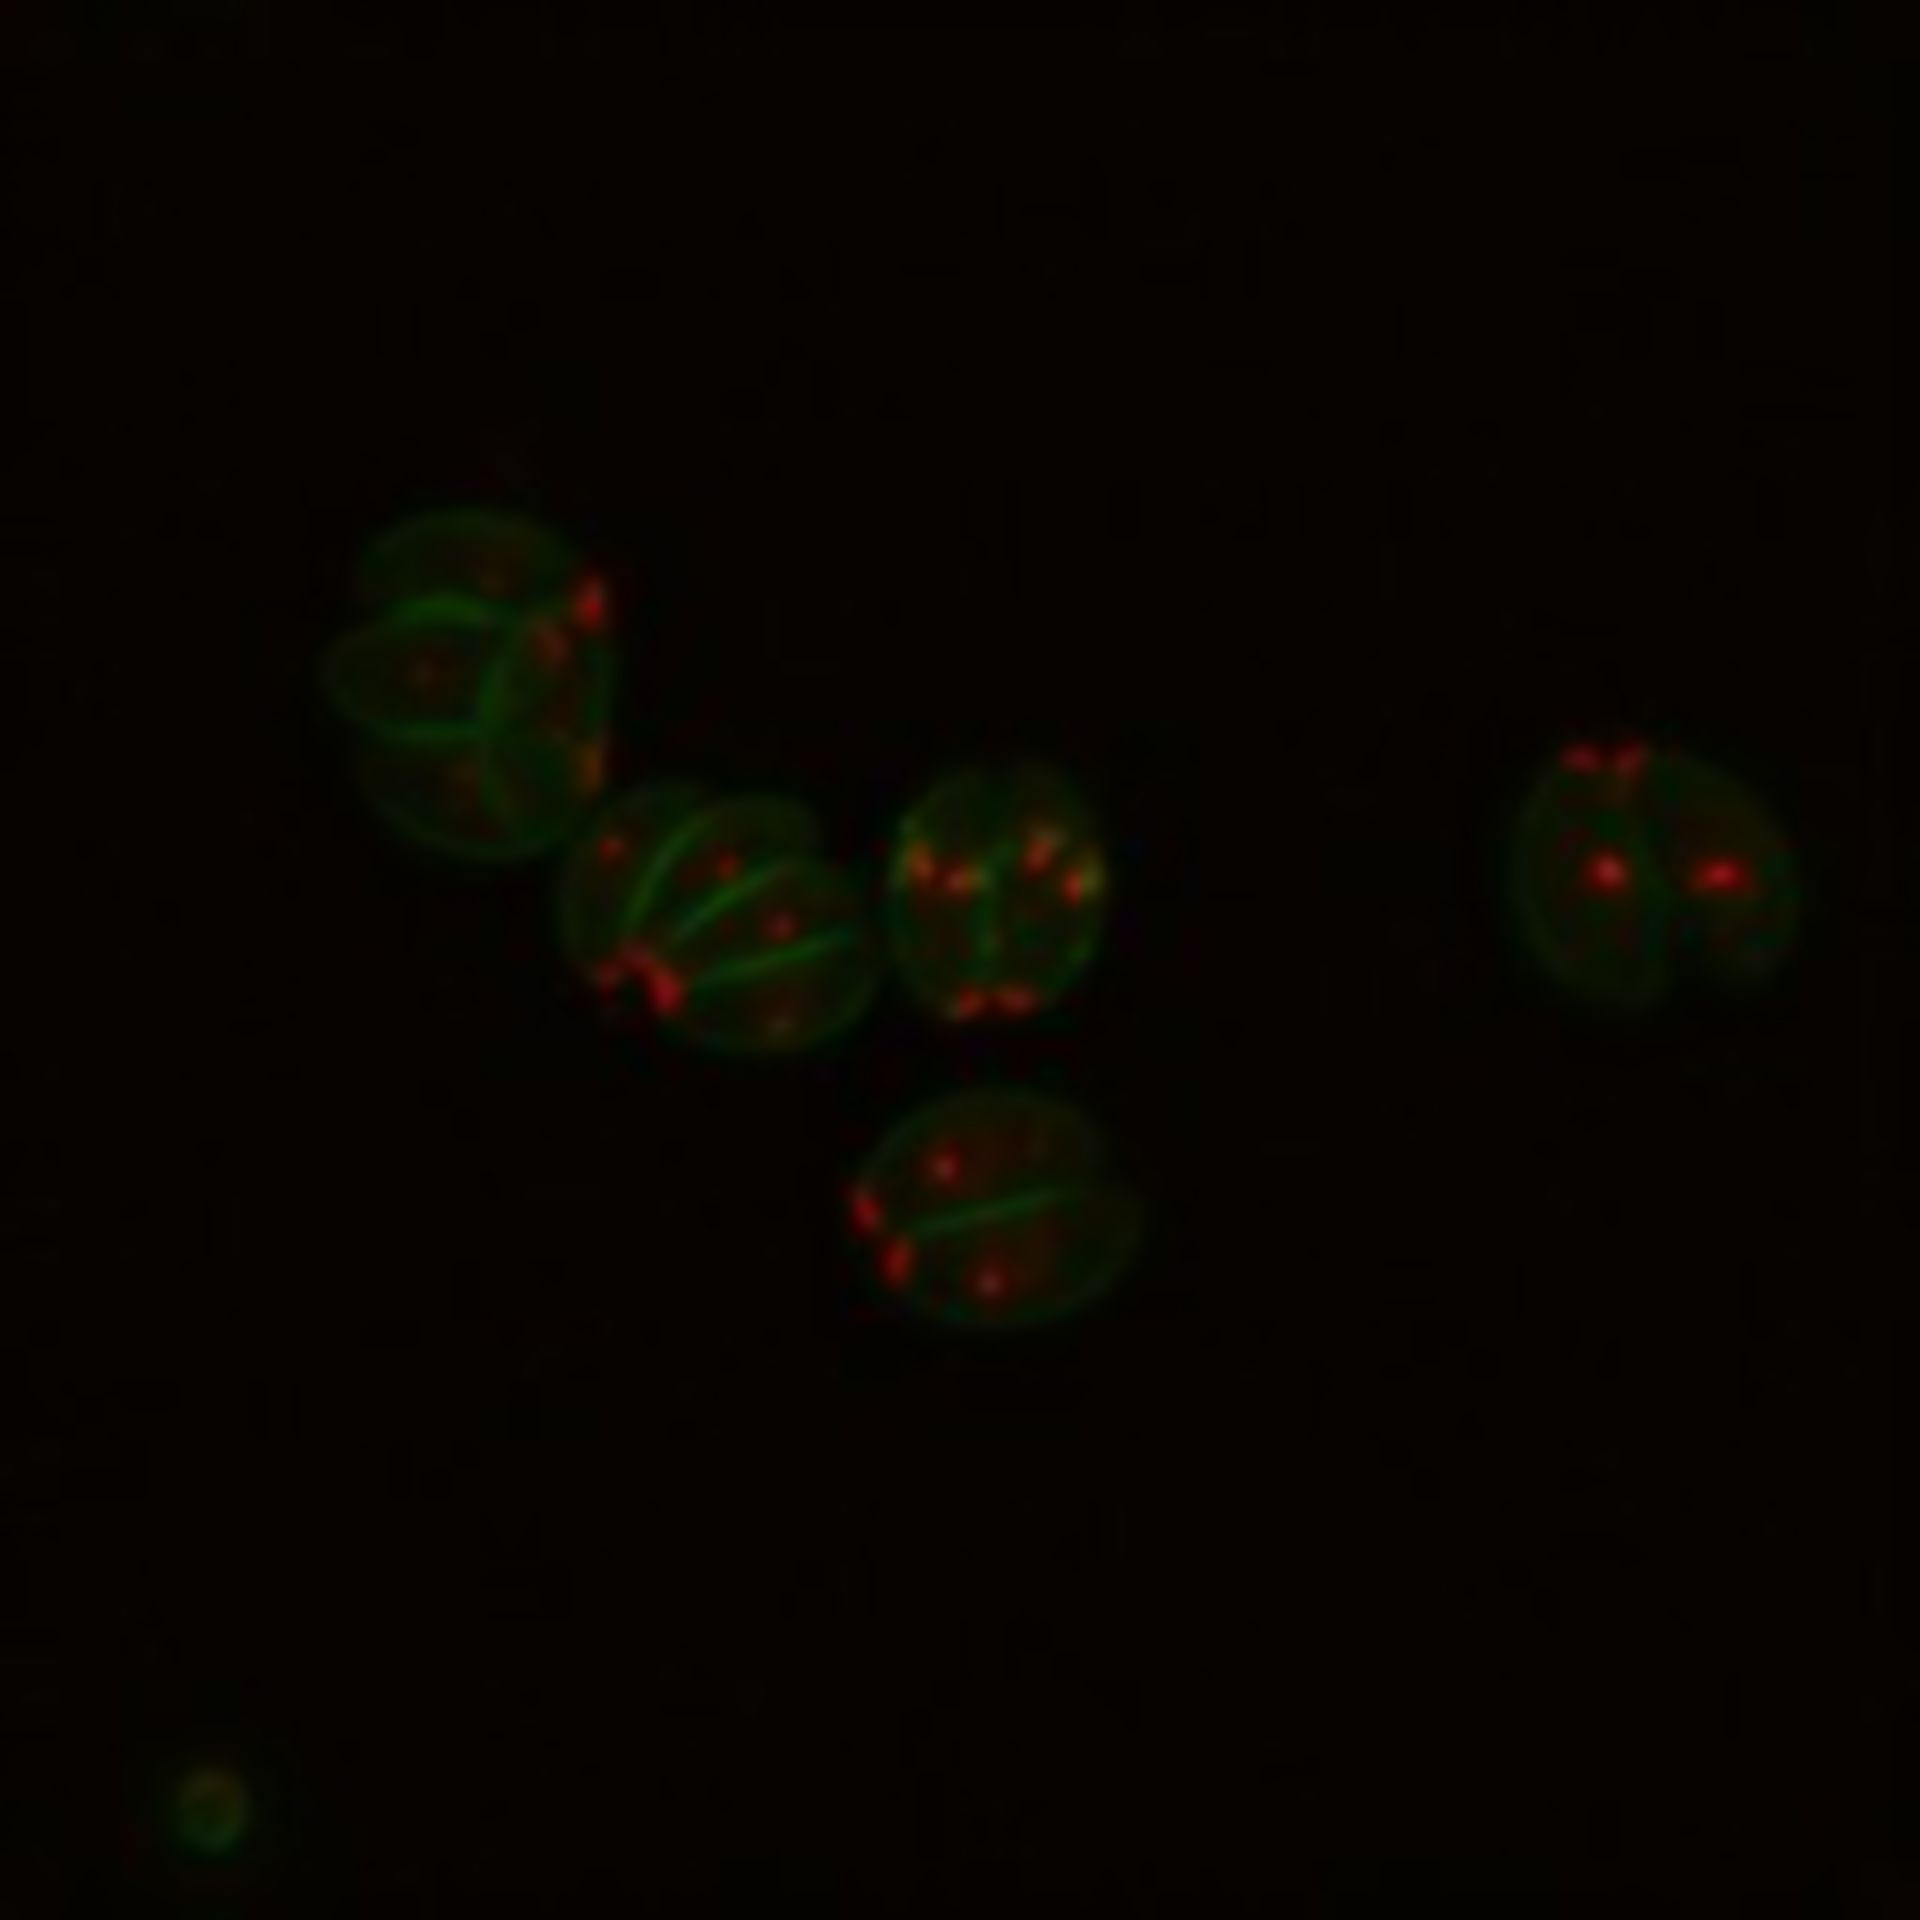 Toxoplasma gondii RH (Basal part of cell) - CIL:10524